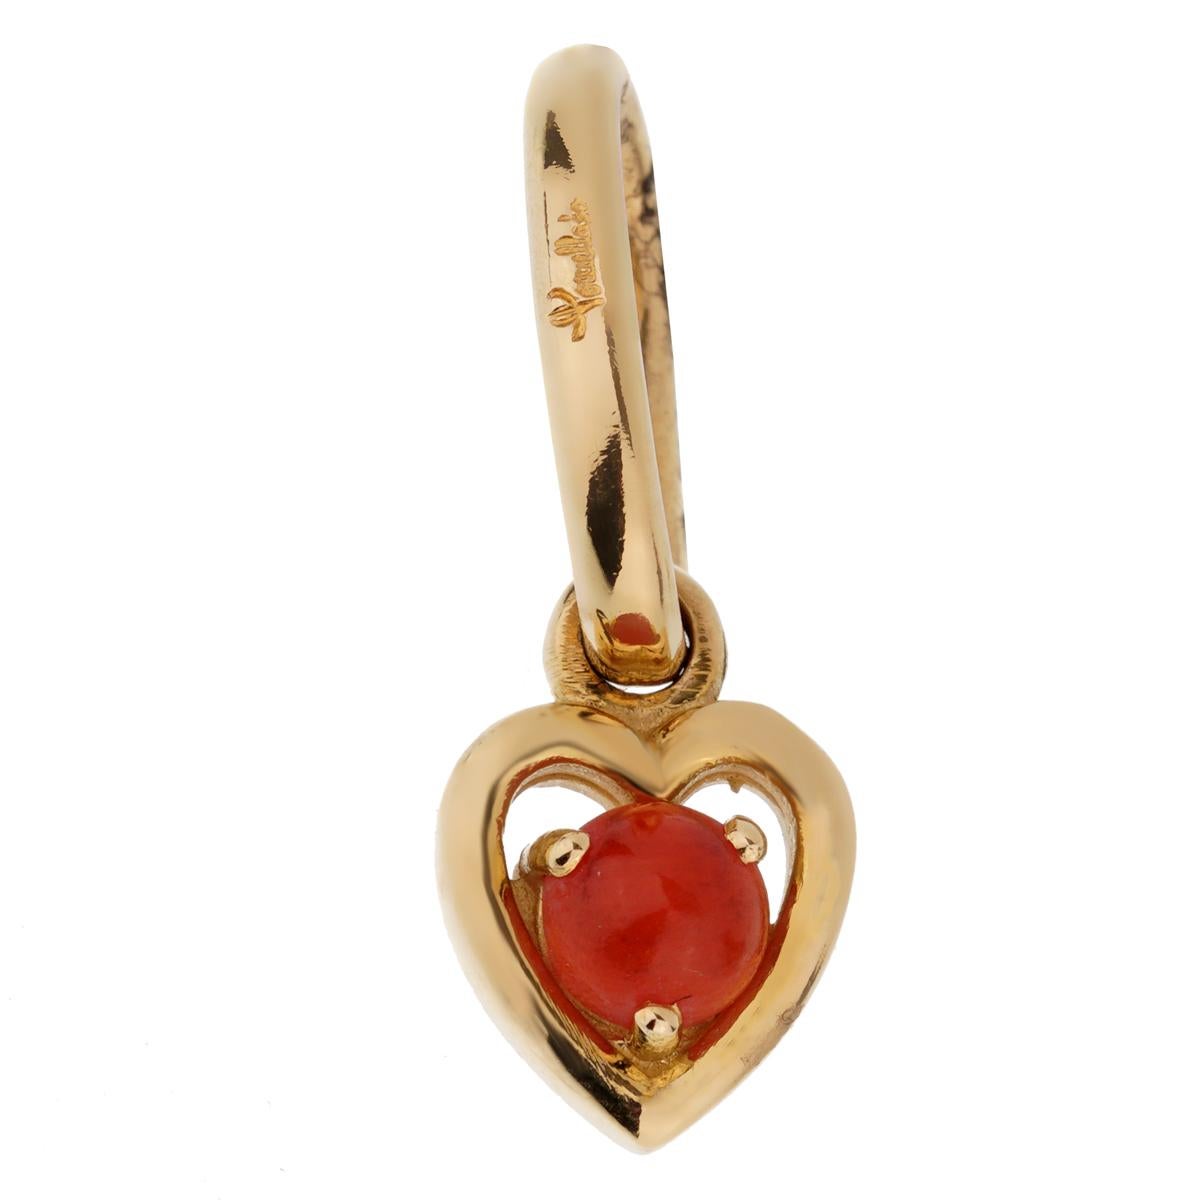 A chic brand new Pomellato charm pendant featuring a .28ct Red Coral set in 18k yellow gold. 

Sku: 2226